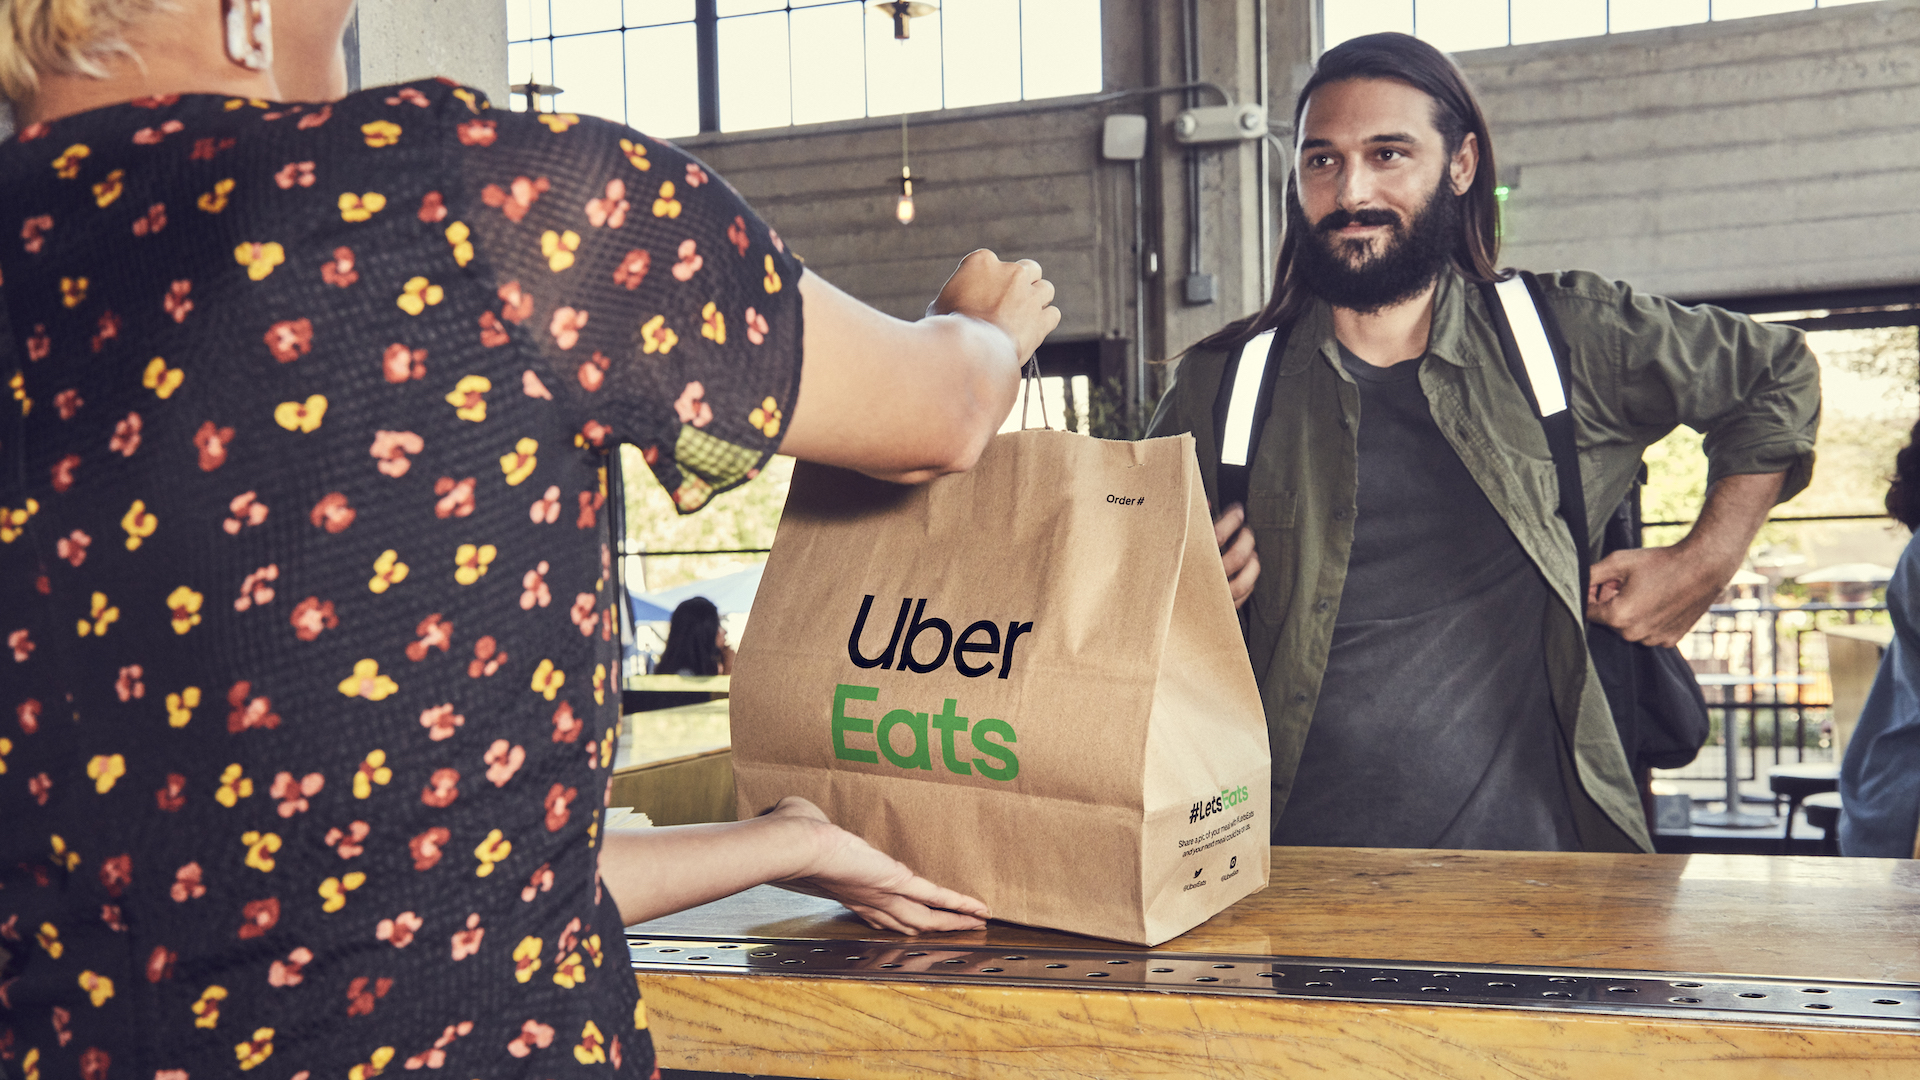 a man aproaches a restaurant counter with a paper bag saying "uber eats"